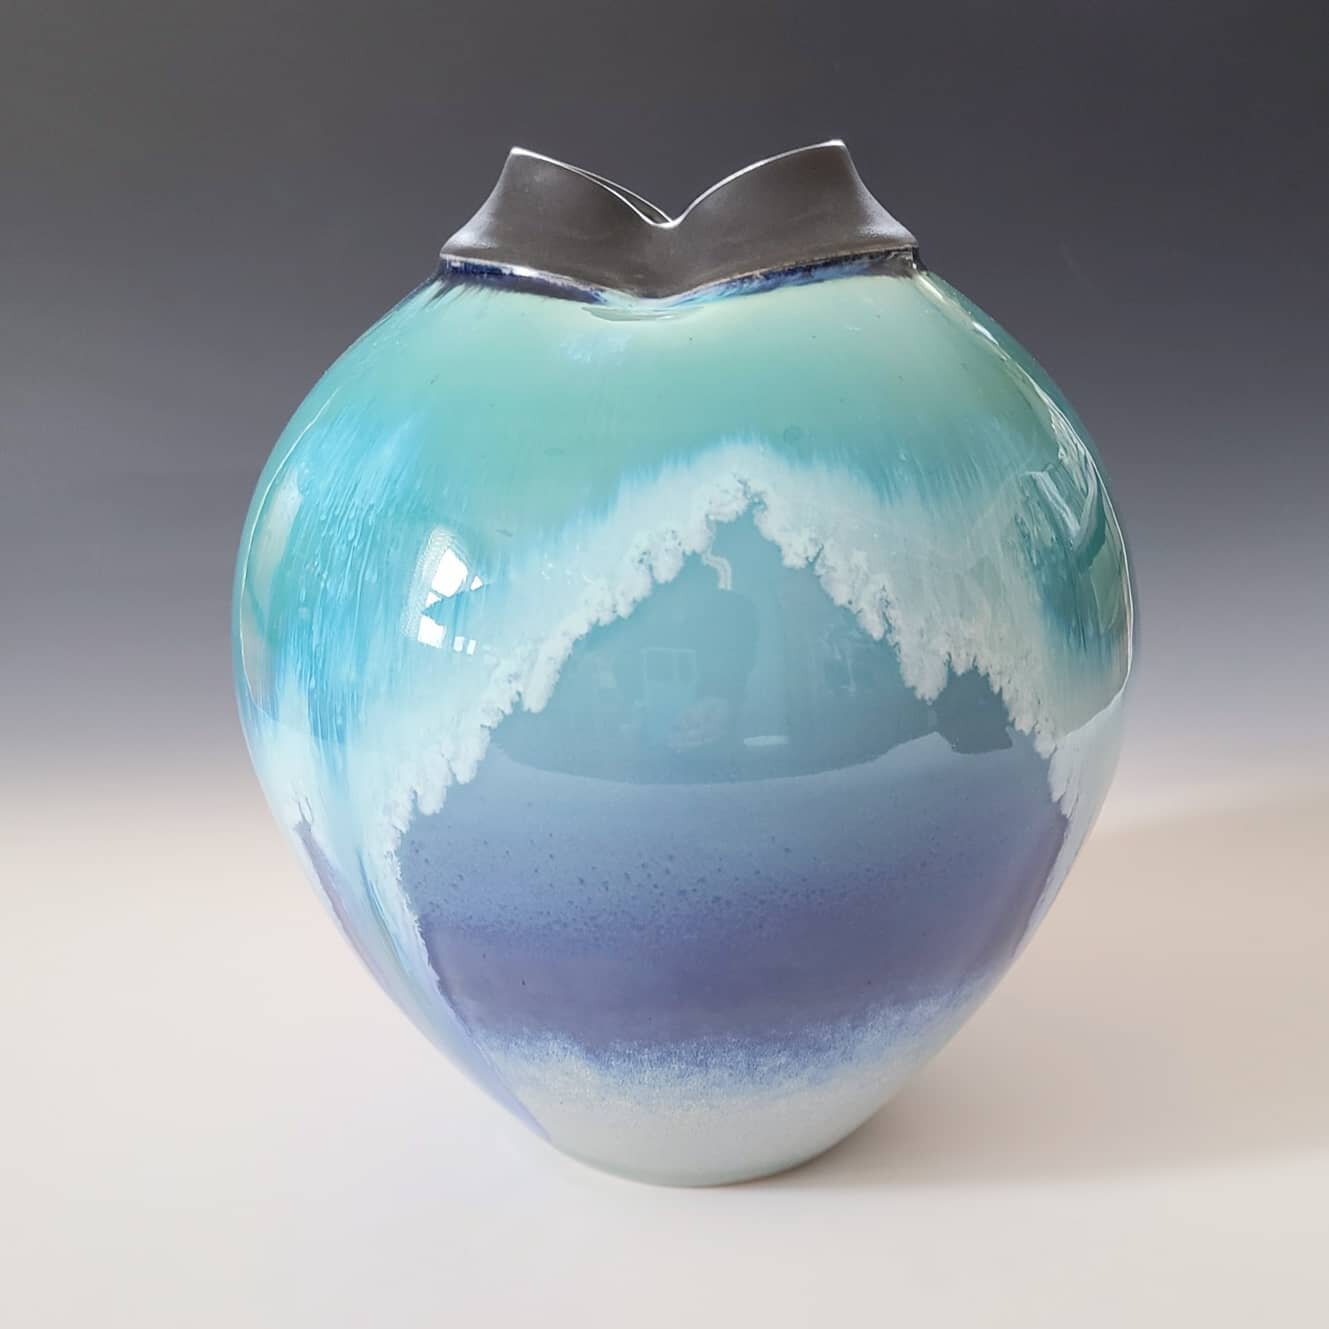 Meet Ms. Atlantis. It is said their was two waterfalls on the island, captured in her glaze. 
.
.
.
.
.
.
.
.
.
.
.
.
.
#puzzpottery #porcelainart #handthrownpots #porcelainpottery #handmadevase #ceramicartist #vases #functionalpottery #bluepottery #